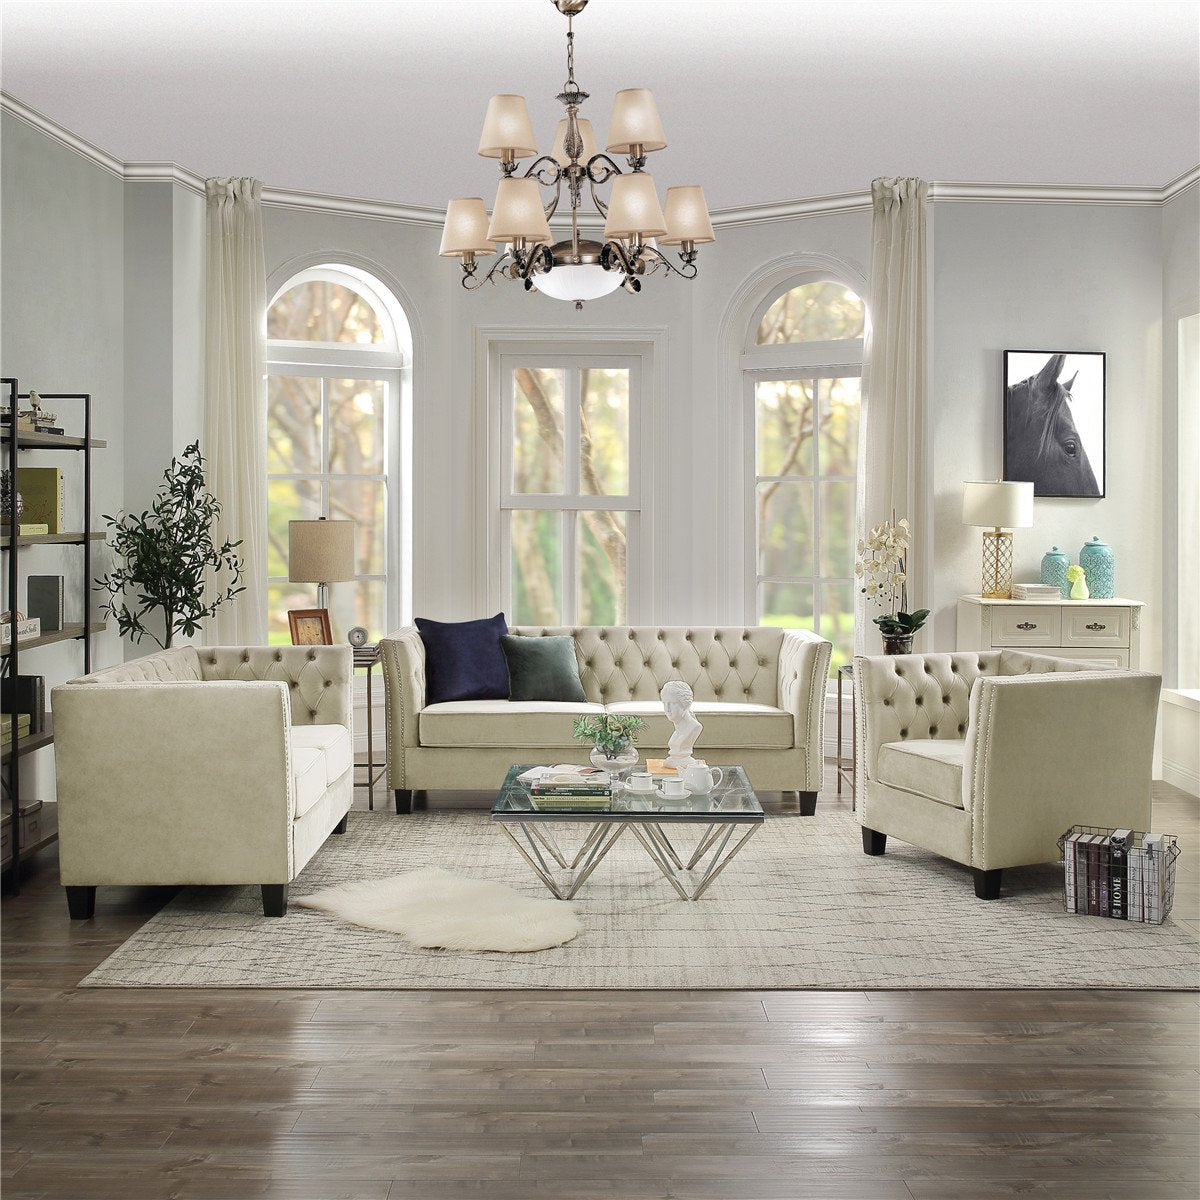 Tufted Living Room Sofa Set with Nailheads